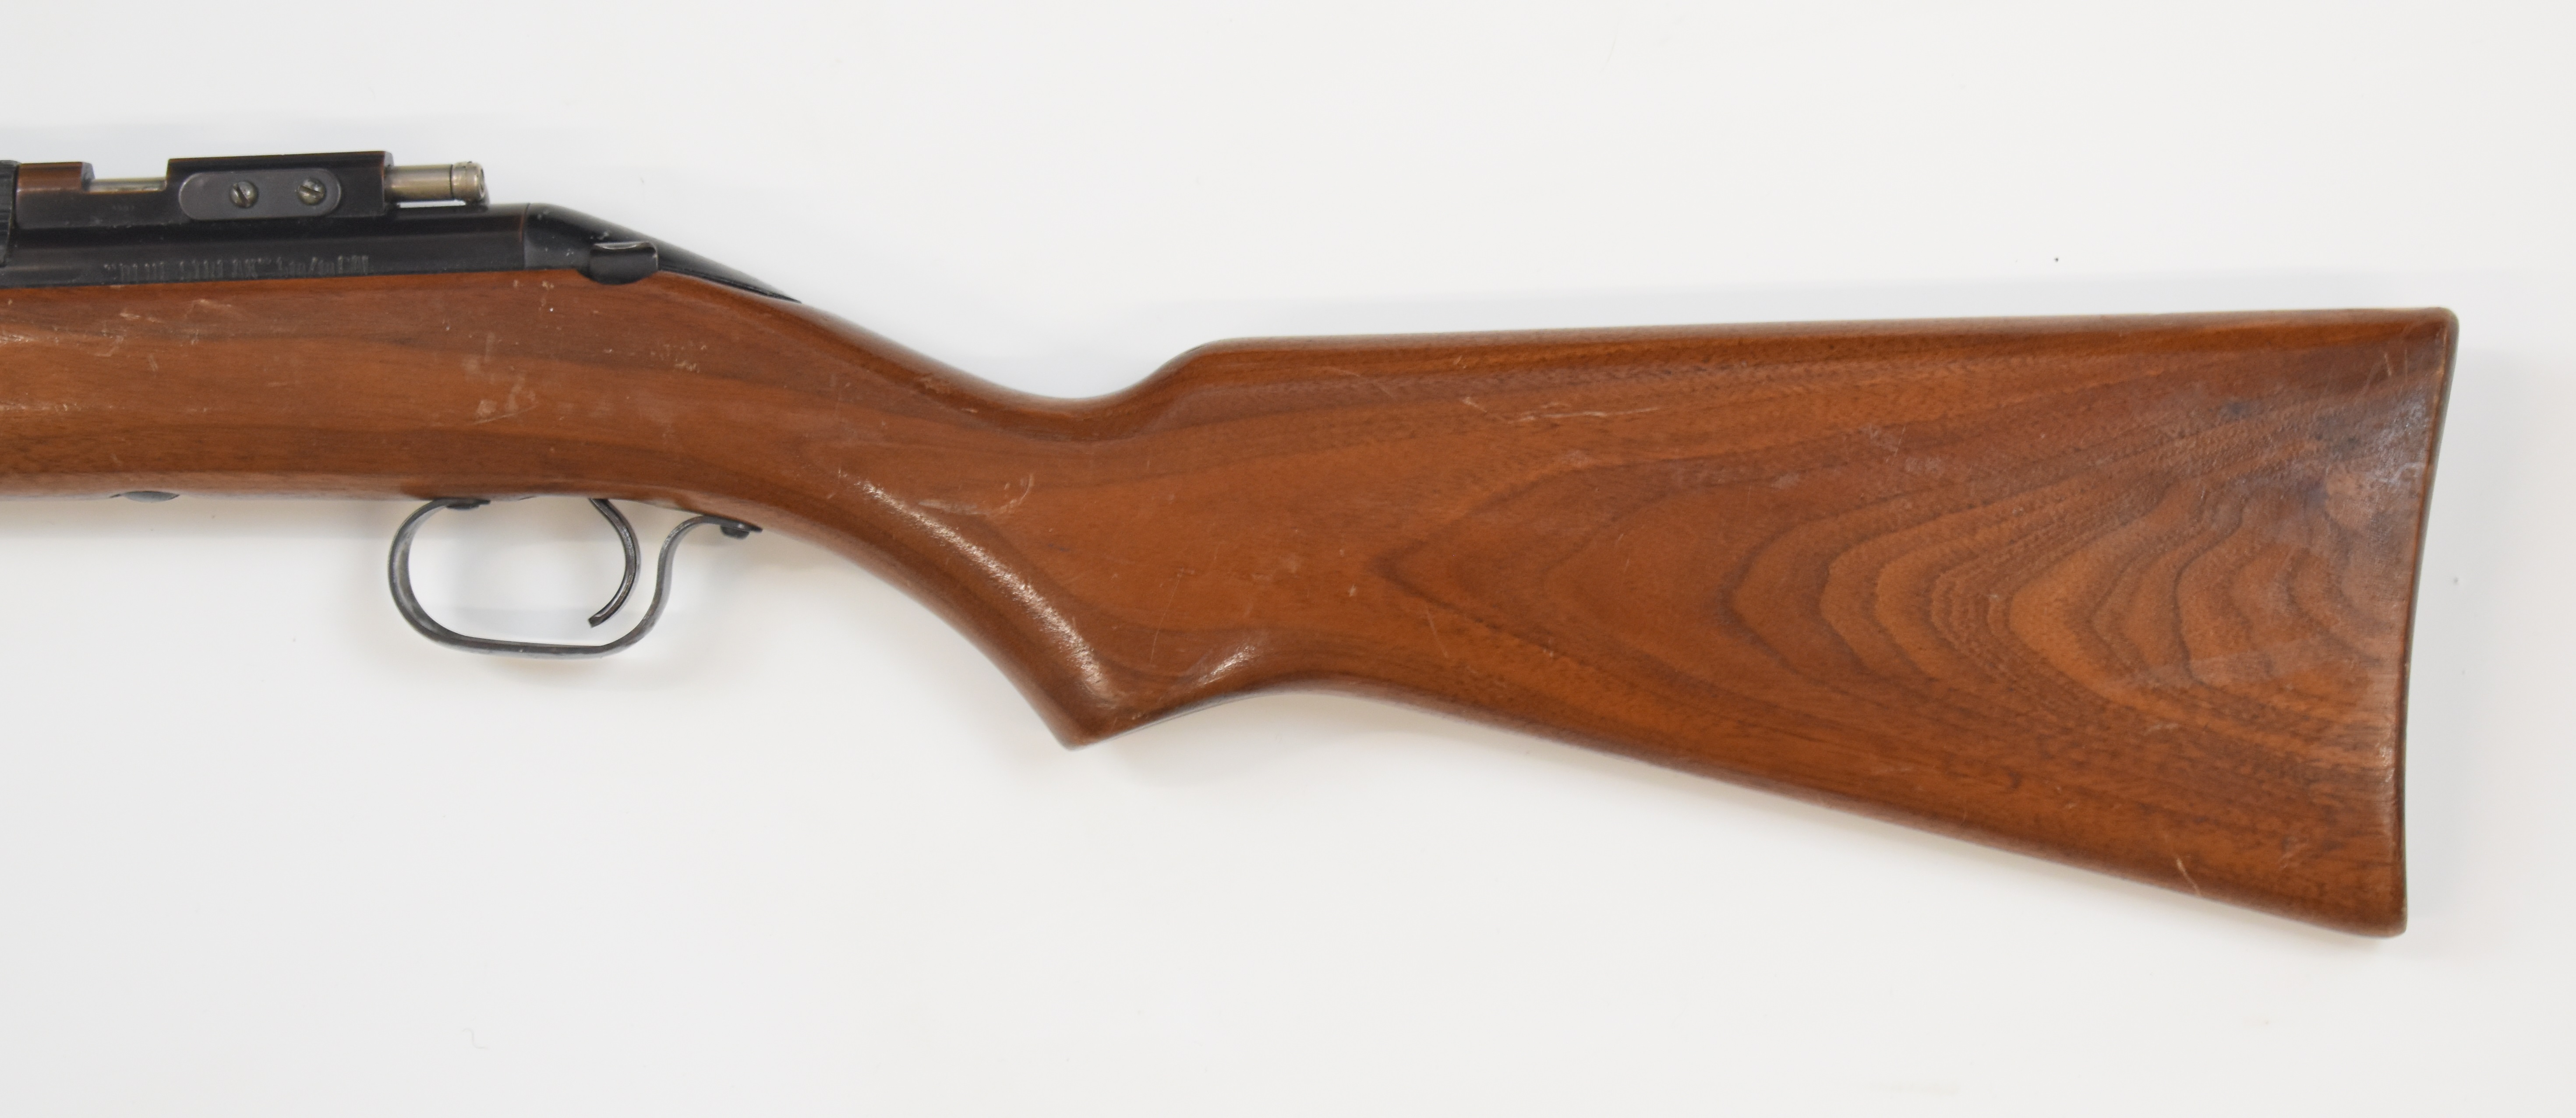 Sheridan Blue Streak .20 bolt-action air rifle with wooden semi-pistol grip and forend and - Image 7 of 8